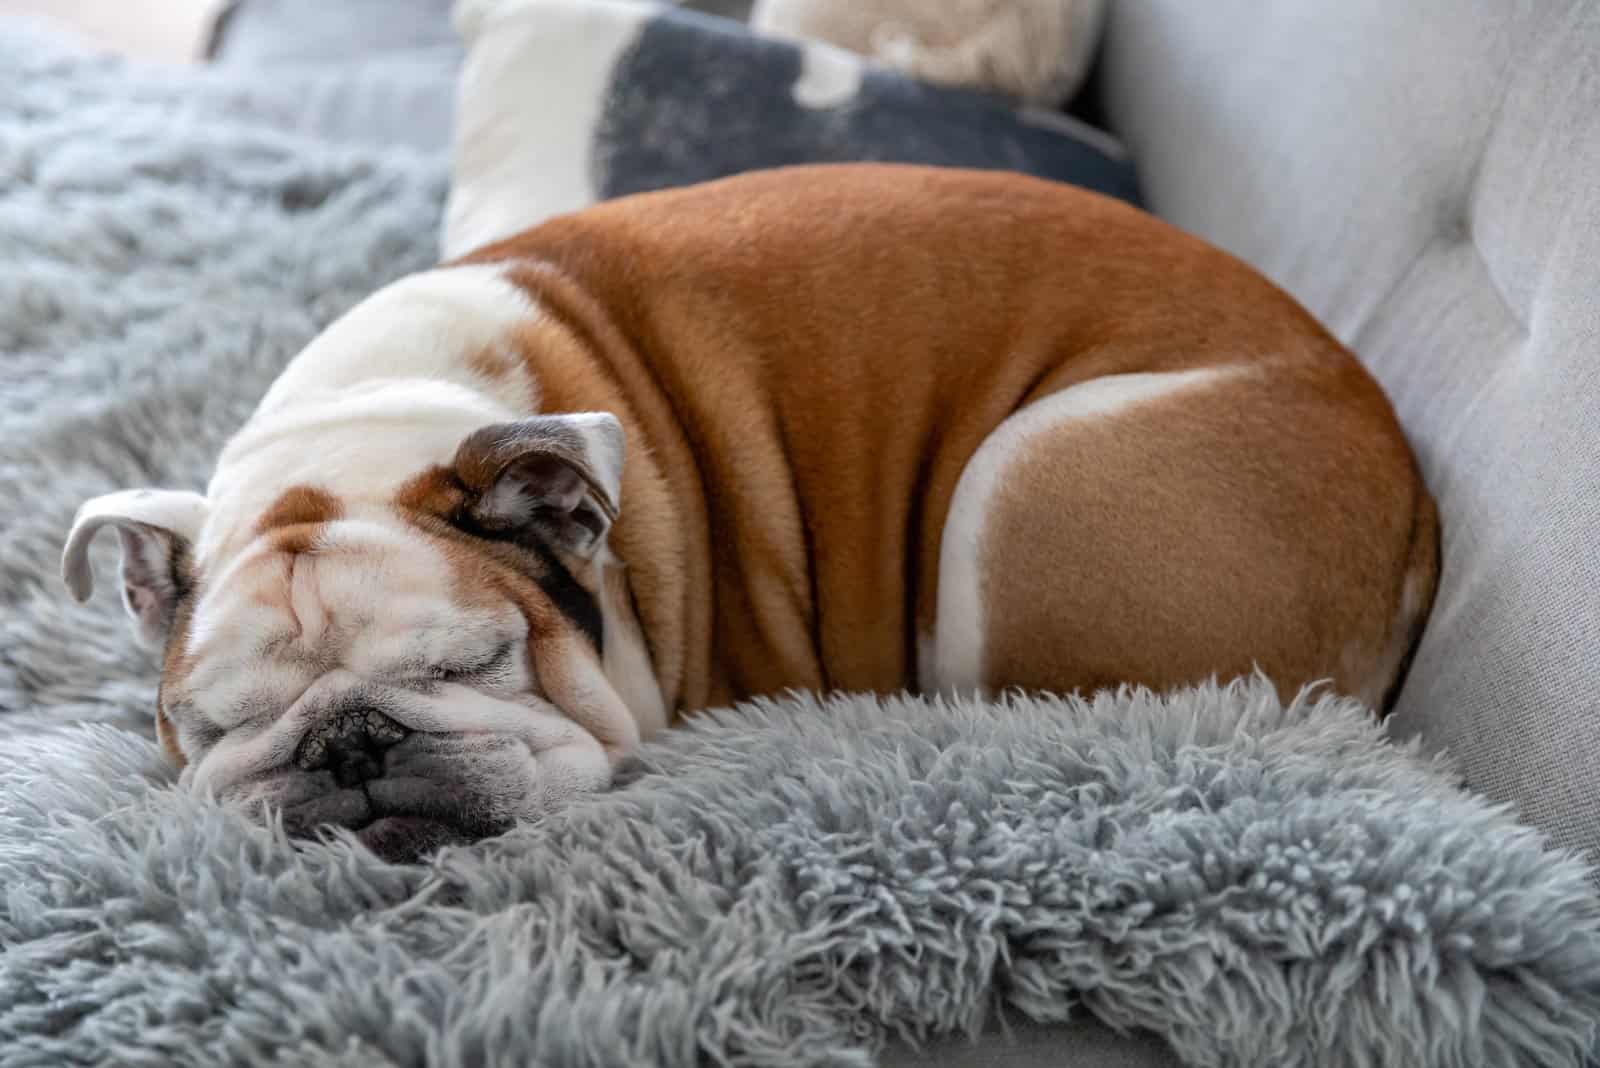 English Bulldog lying on the couch and sleeping